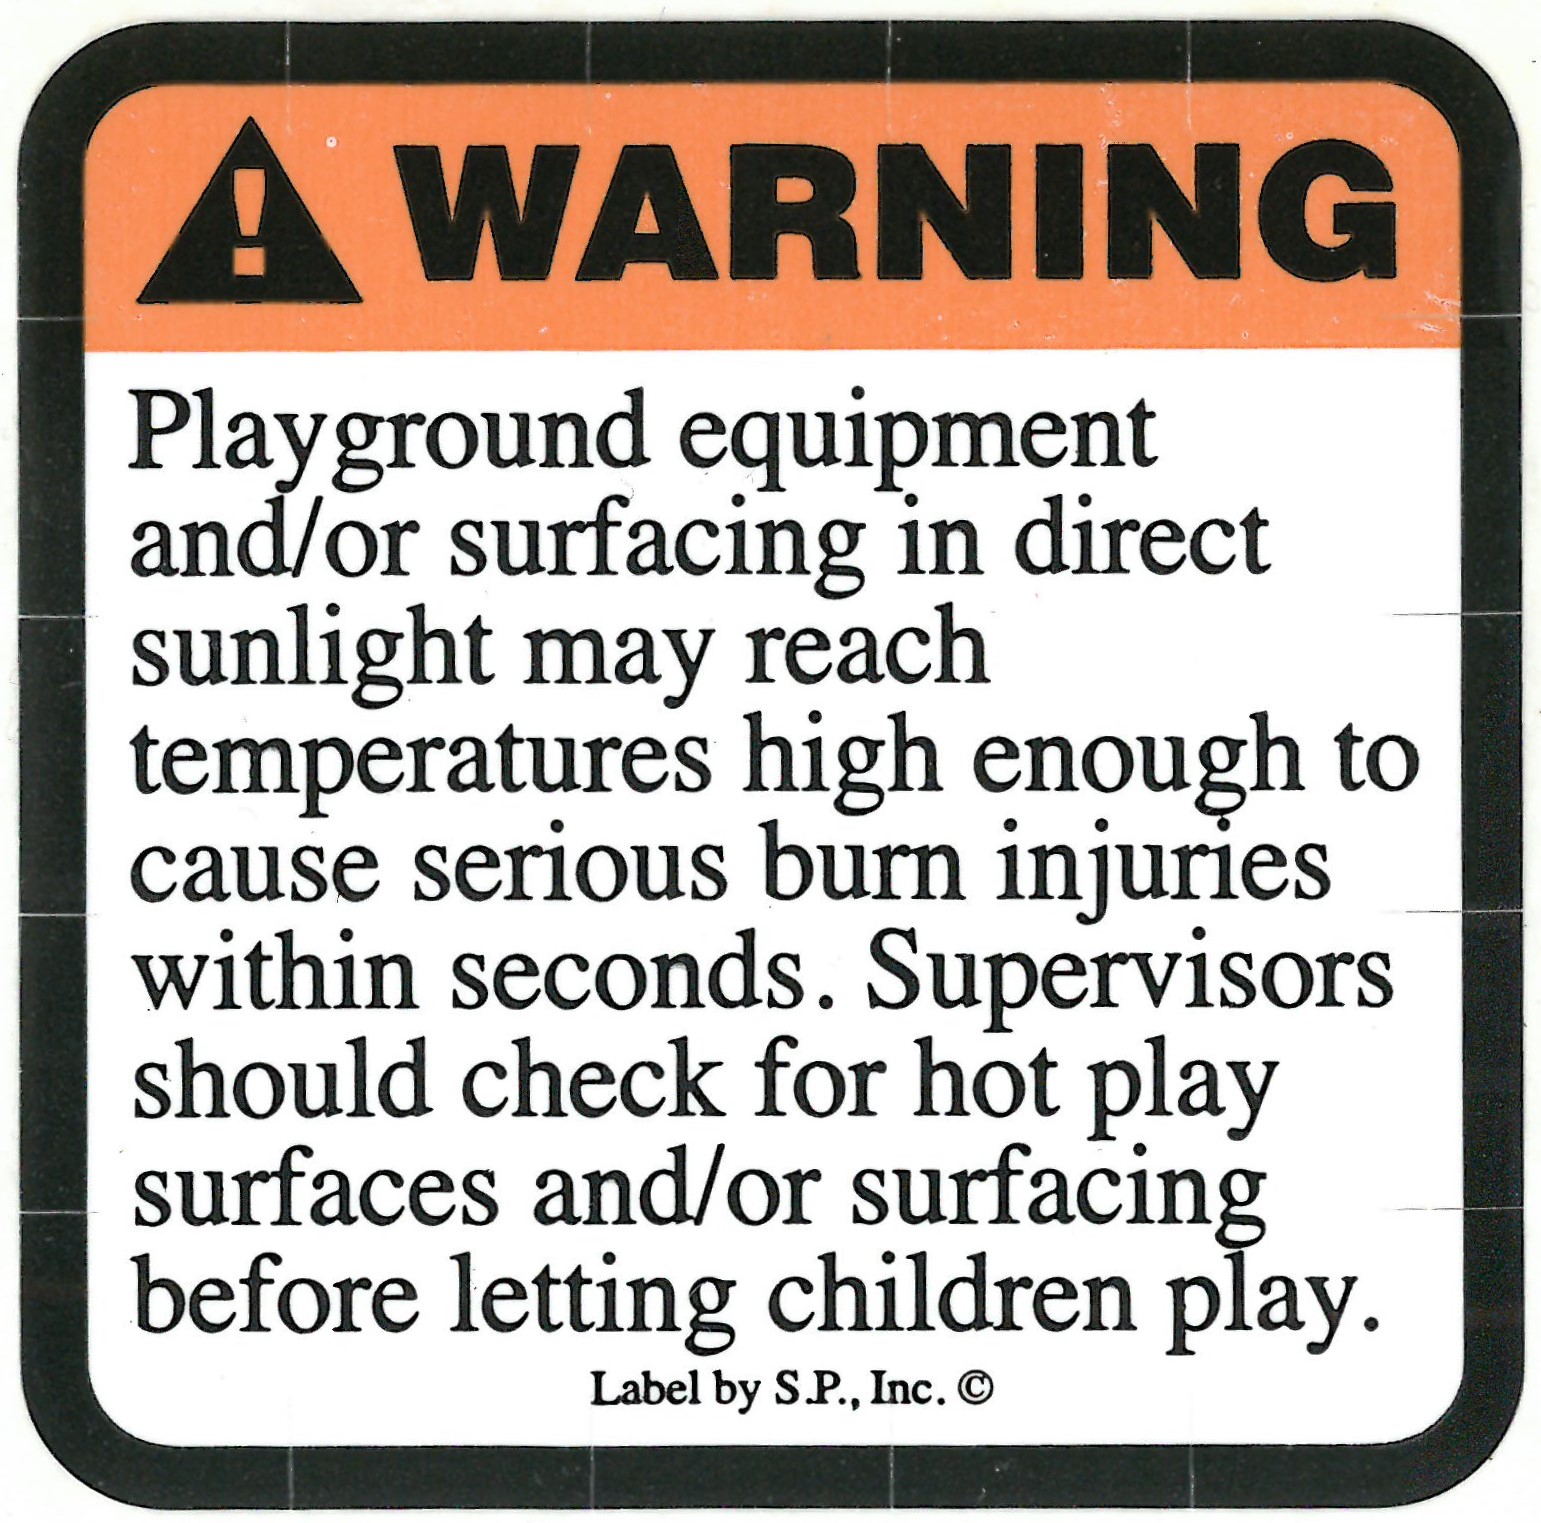 Warning! Playground equipment and/or surfacing in direct sunlight may reach temperatures high enough to cause serious burn injuries within seconds. Supervisors should check for hot play surfaces and/or surfacing before letting children play.